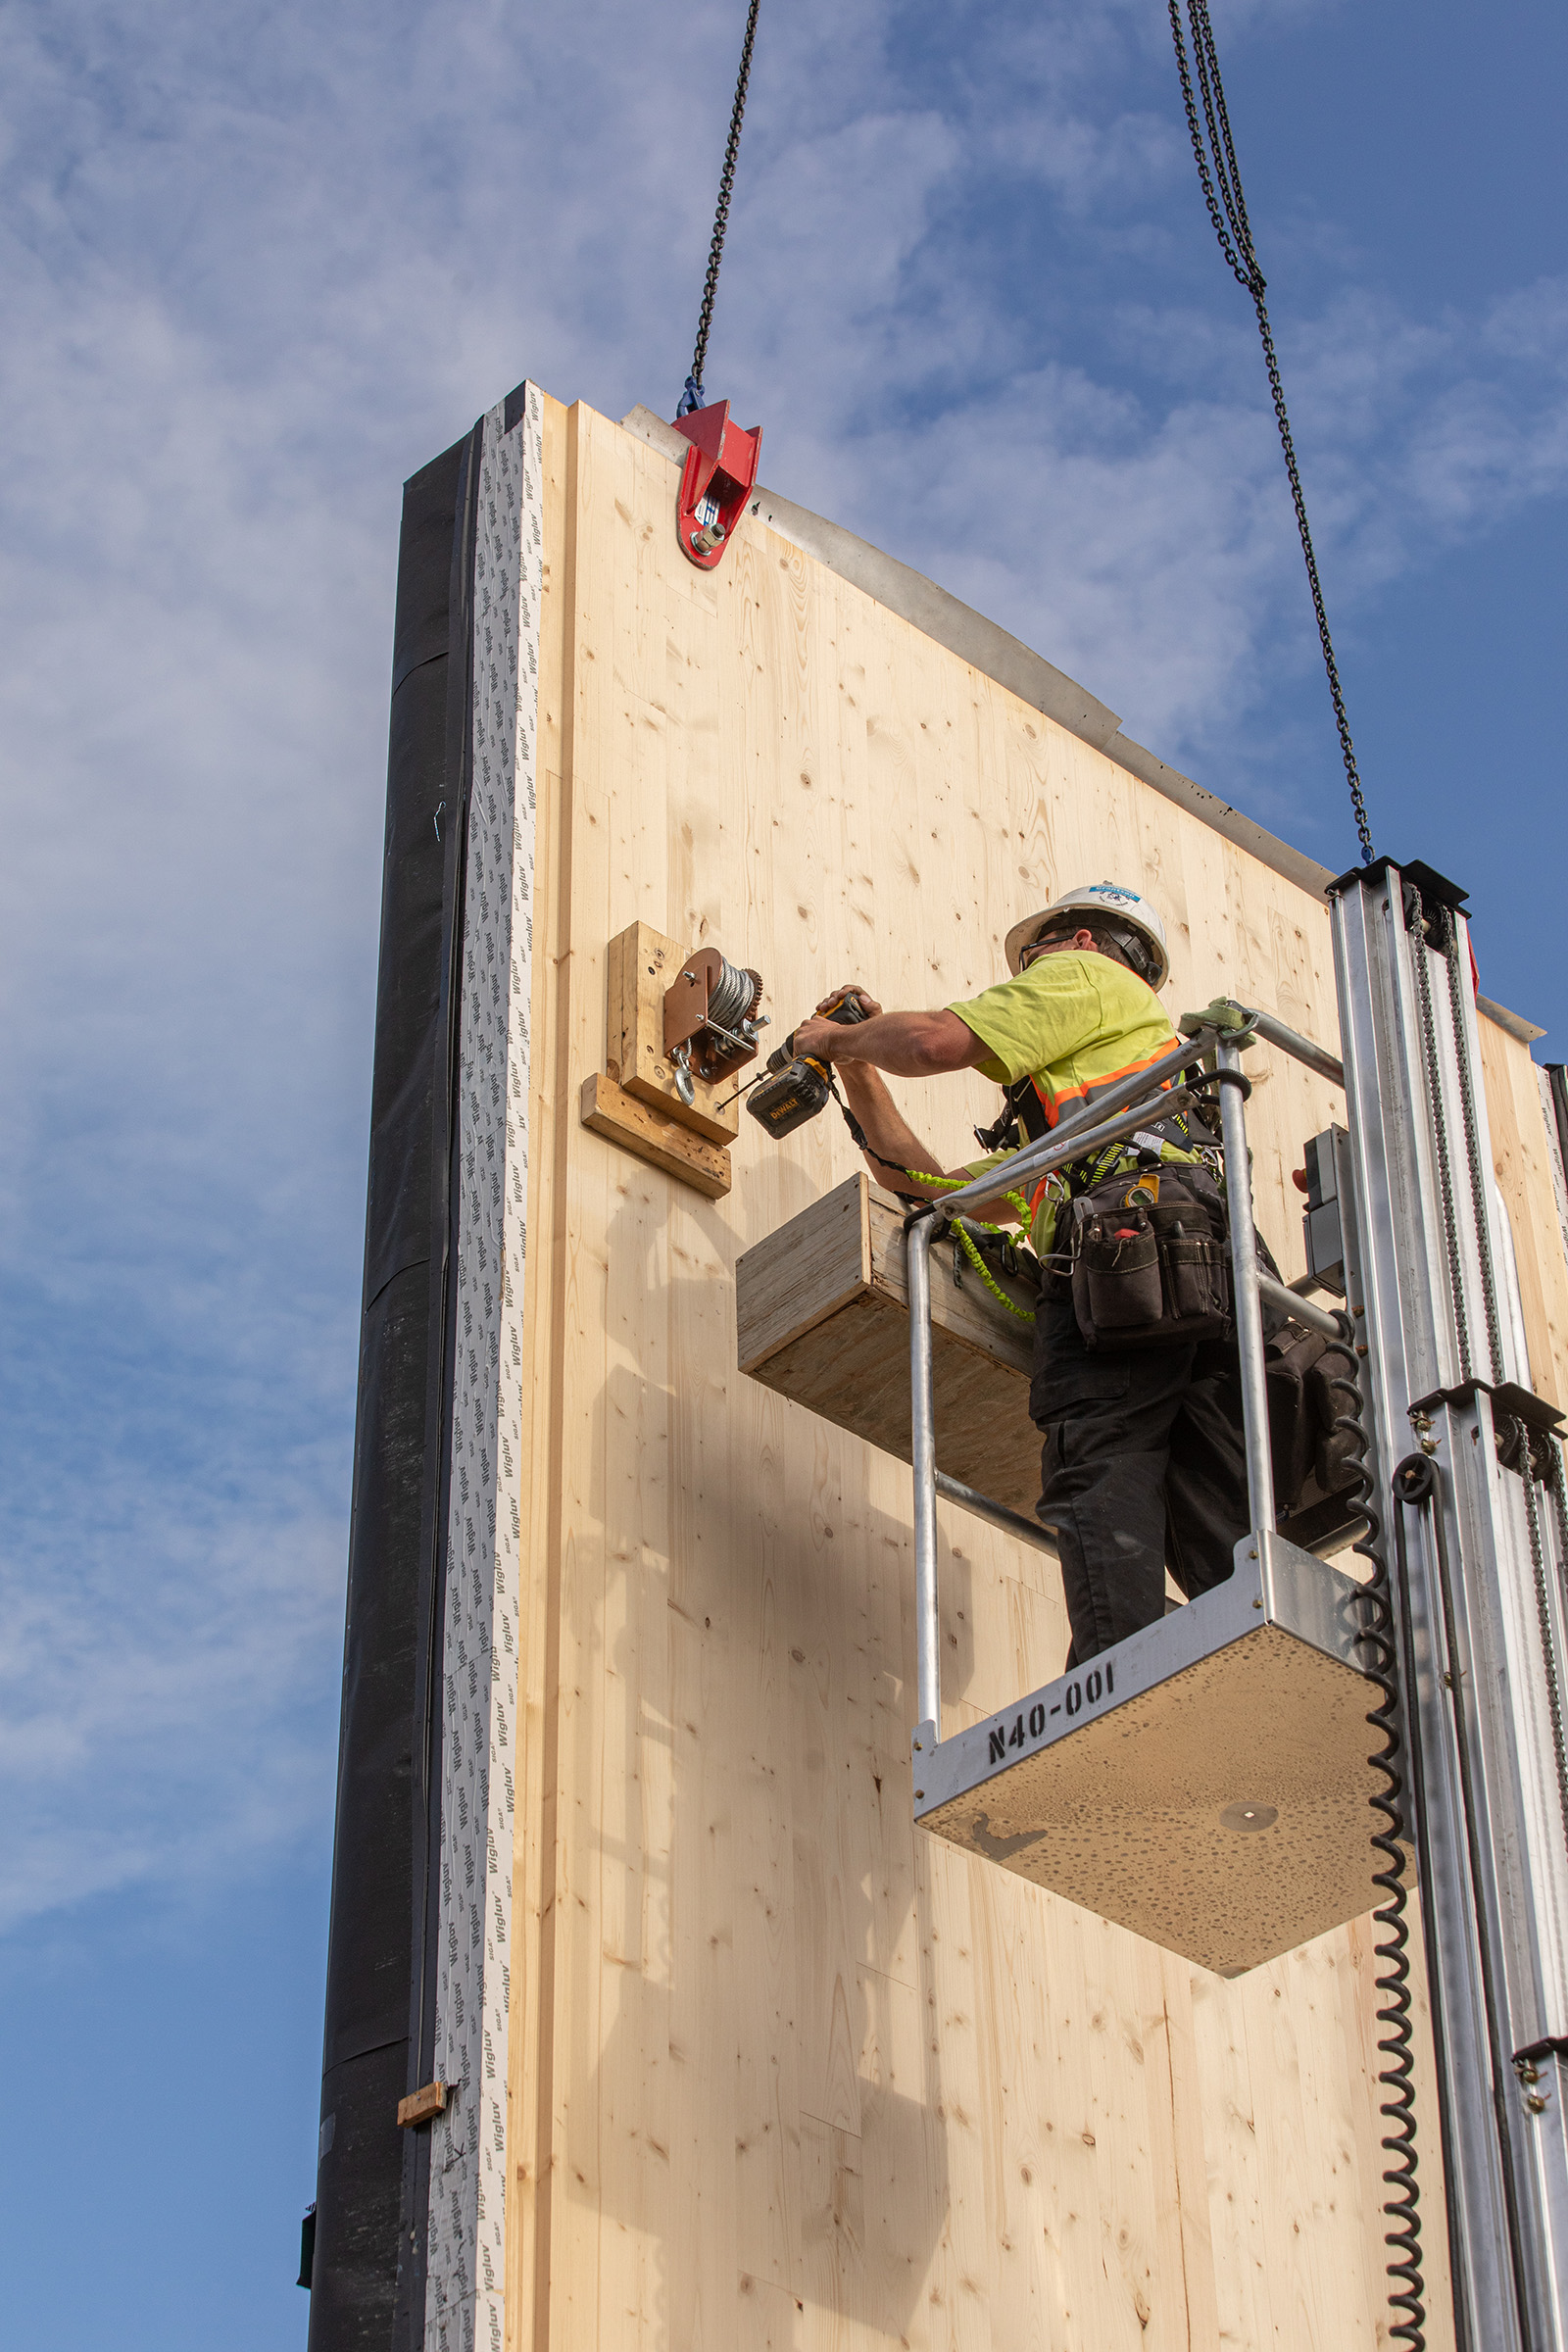 A construction worker drills into a hoisted wood panel